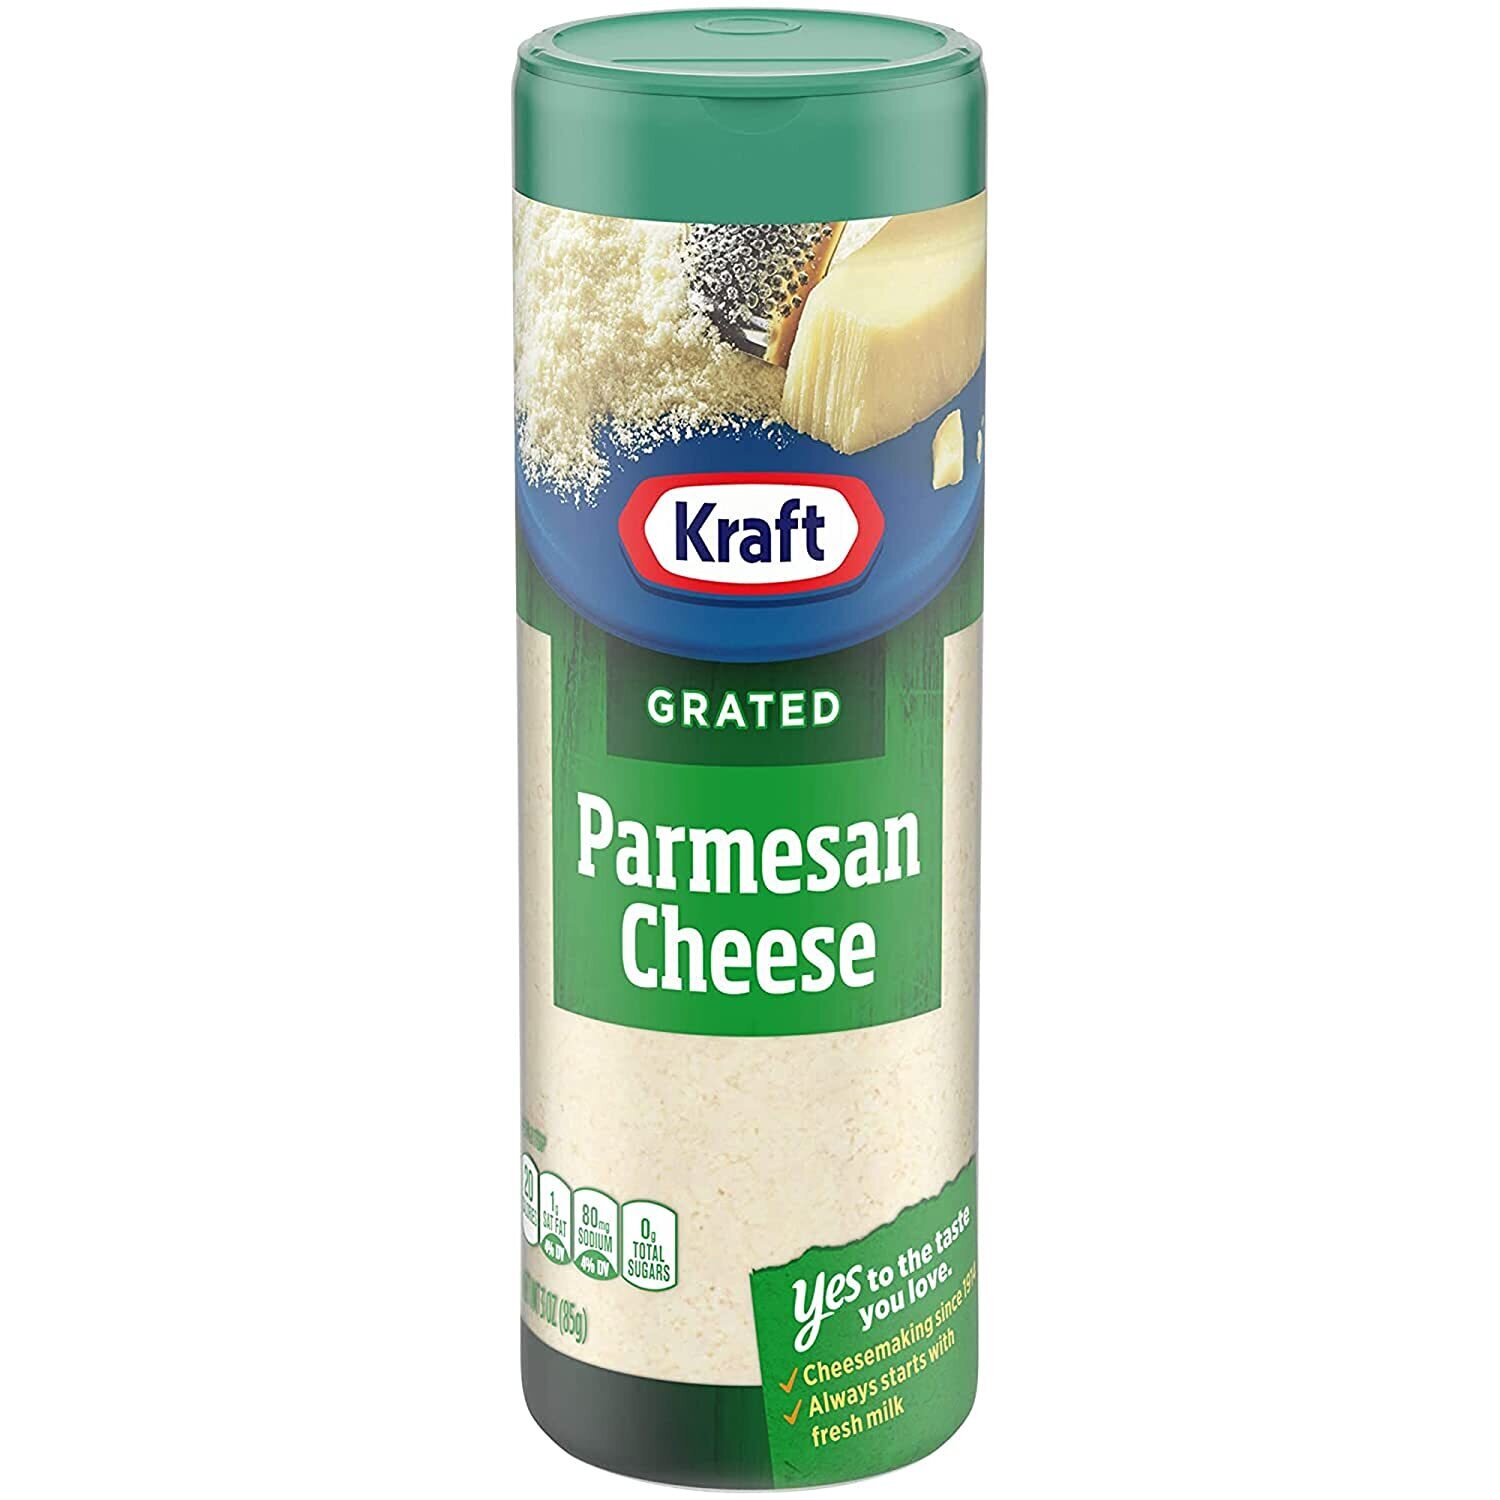 Kraft Parmesan Cheese 100% Grated - 85g (3oz) Imported from USA 